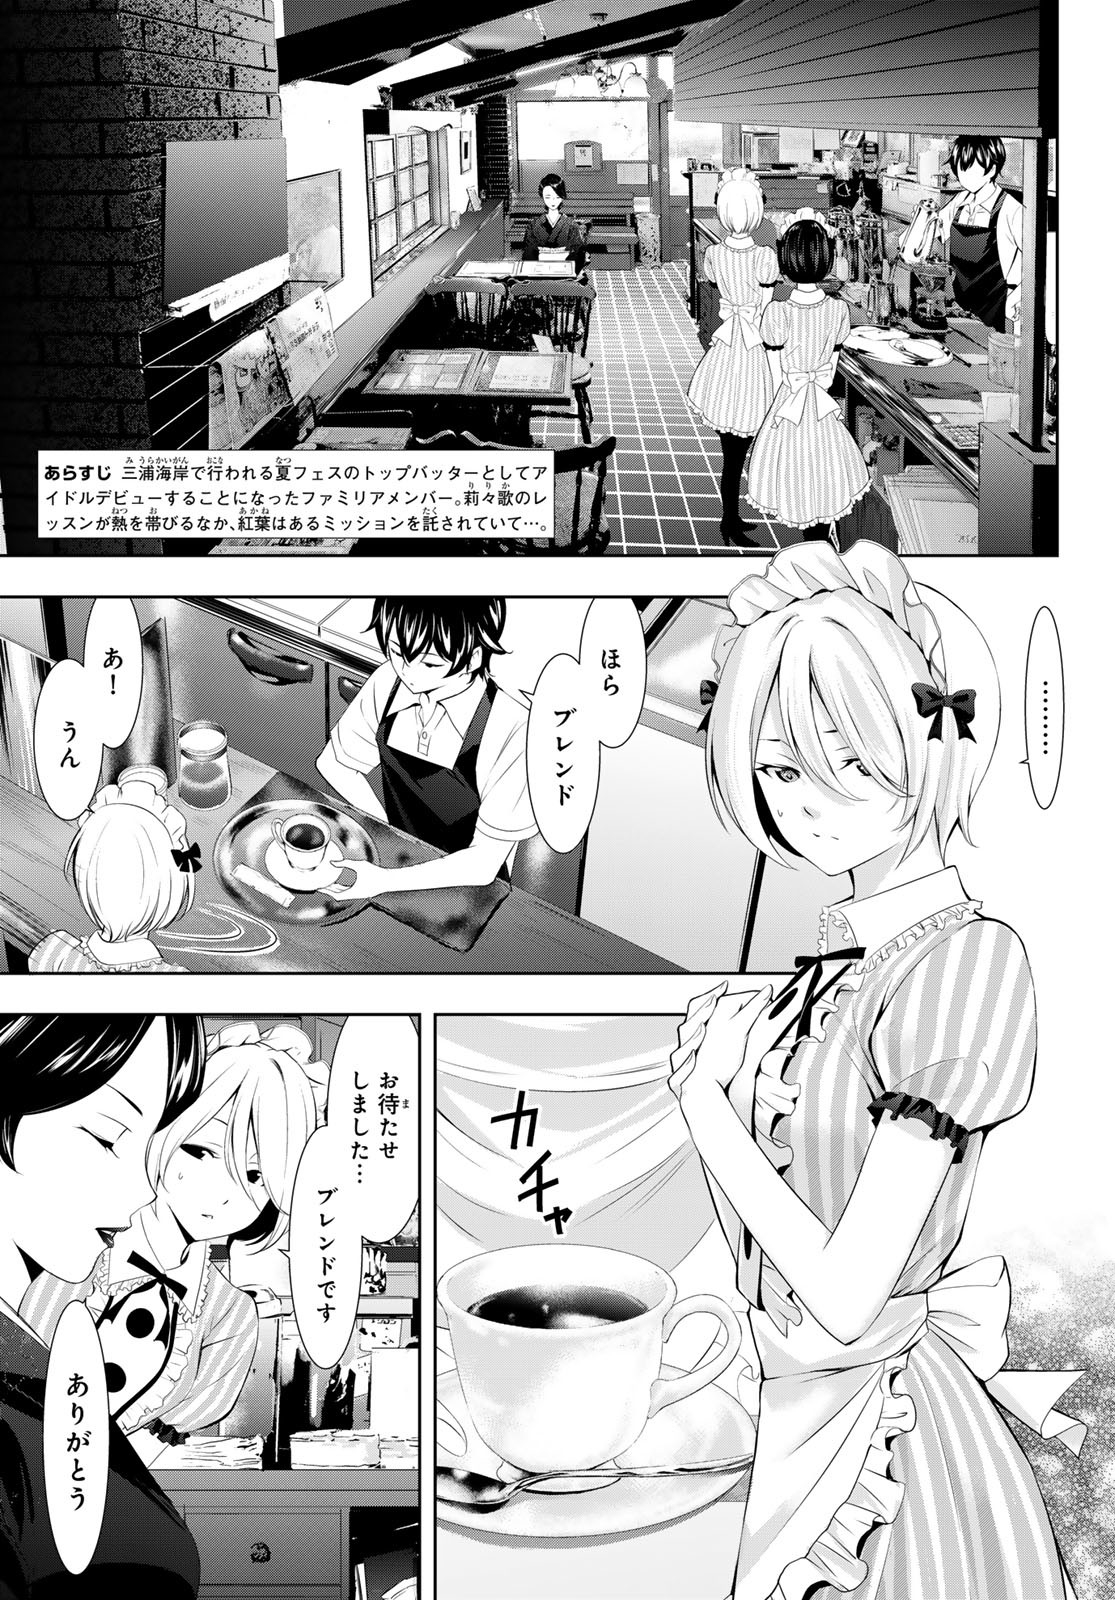 Megami no Cafe Terace - Chapter 130 - Page 3